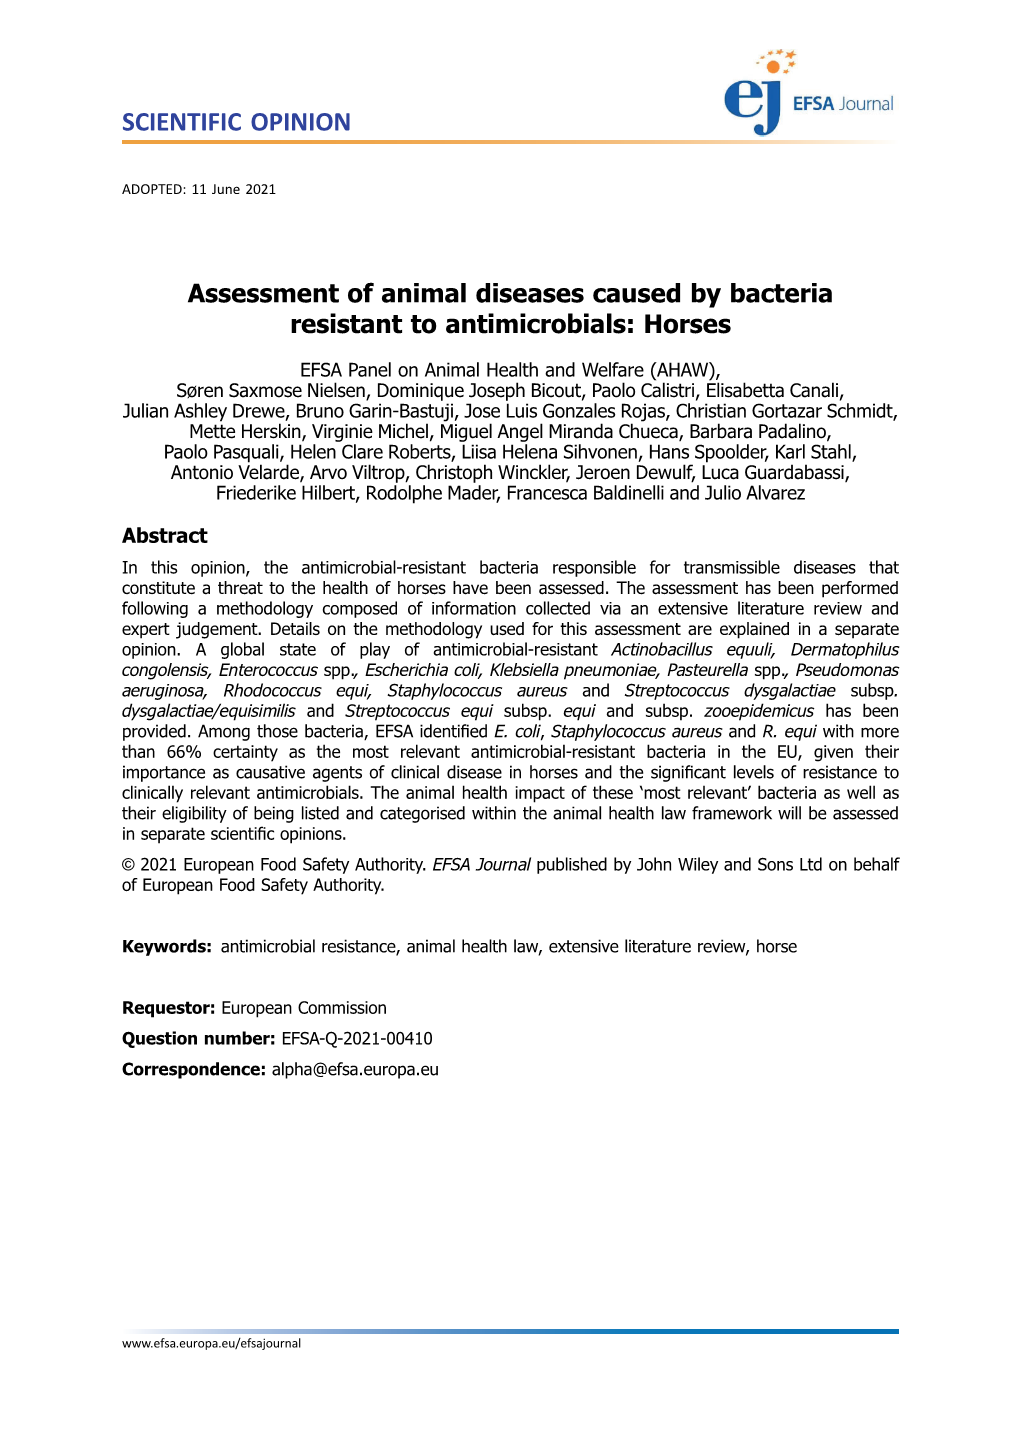 Assessment of Animal Diseases Caused by Bacteria Resistant to Antimicrobials: Horses